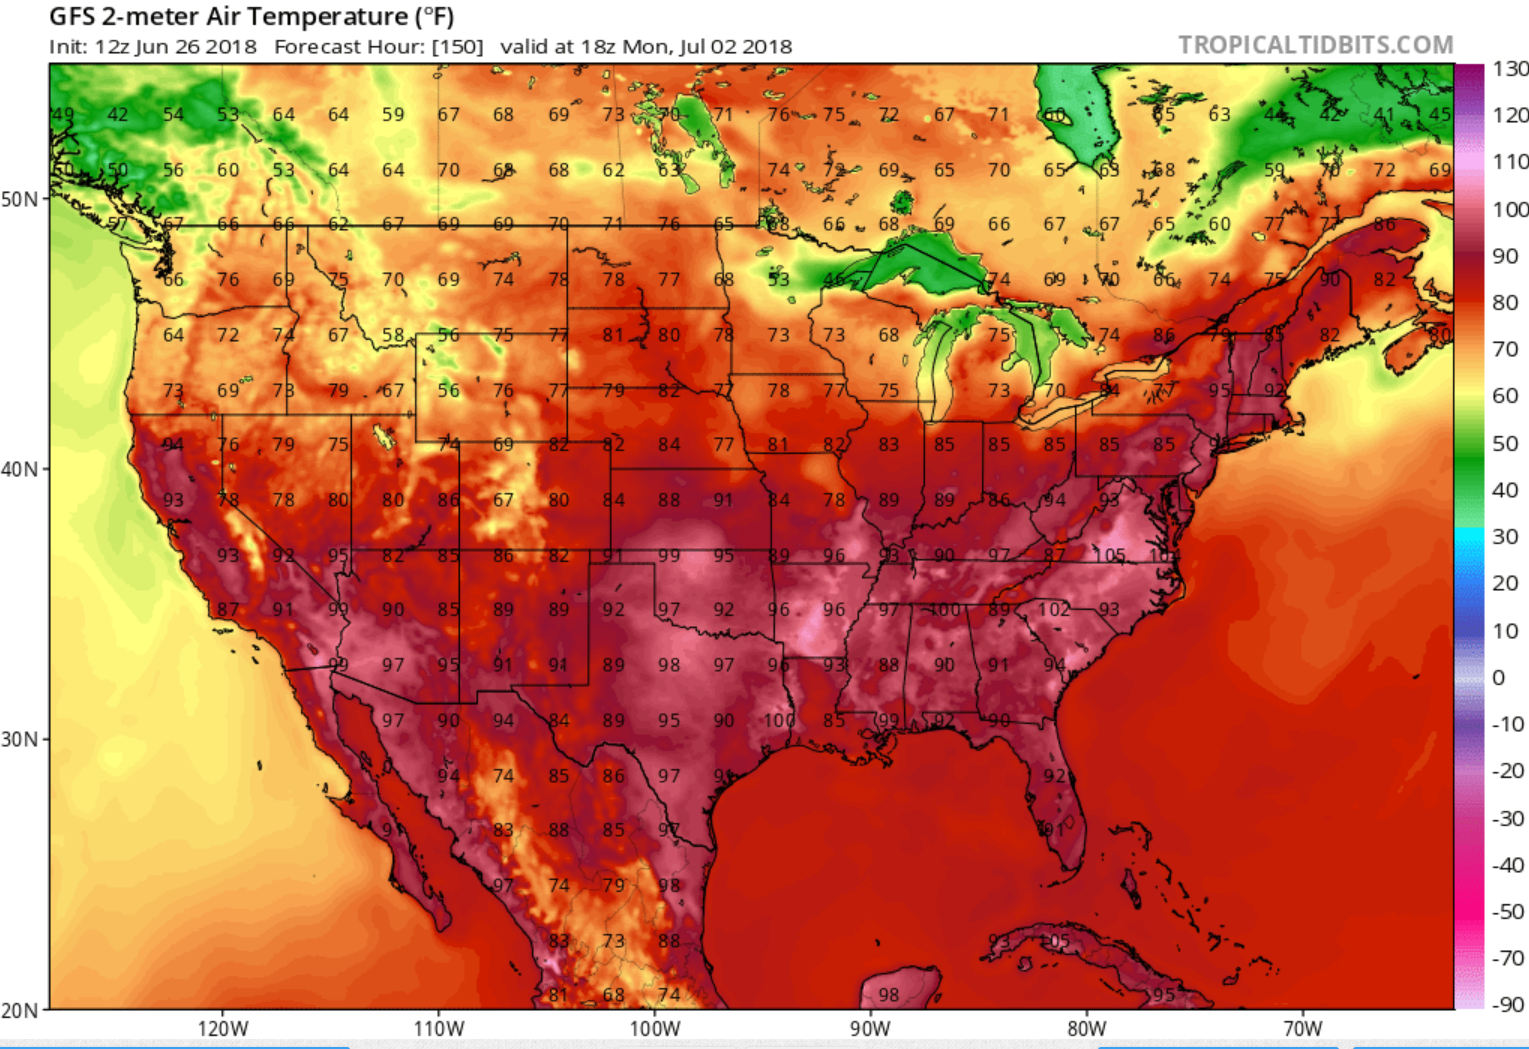 Air temperatures will rise into the 90's and 100's in parts of the country, as this computer generated model forecast suggests for July 2. Image: TropicalTidbits.com